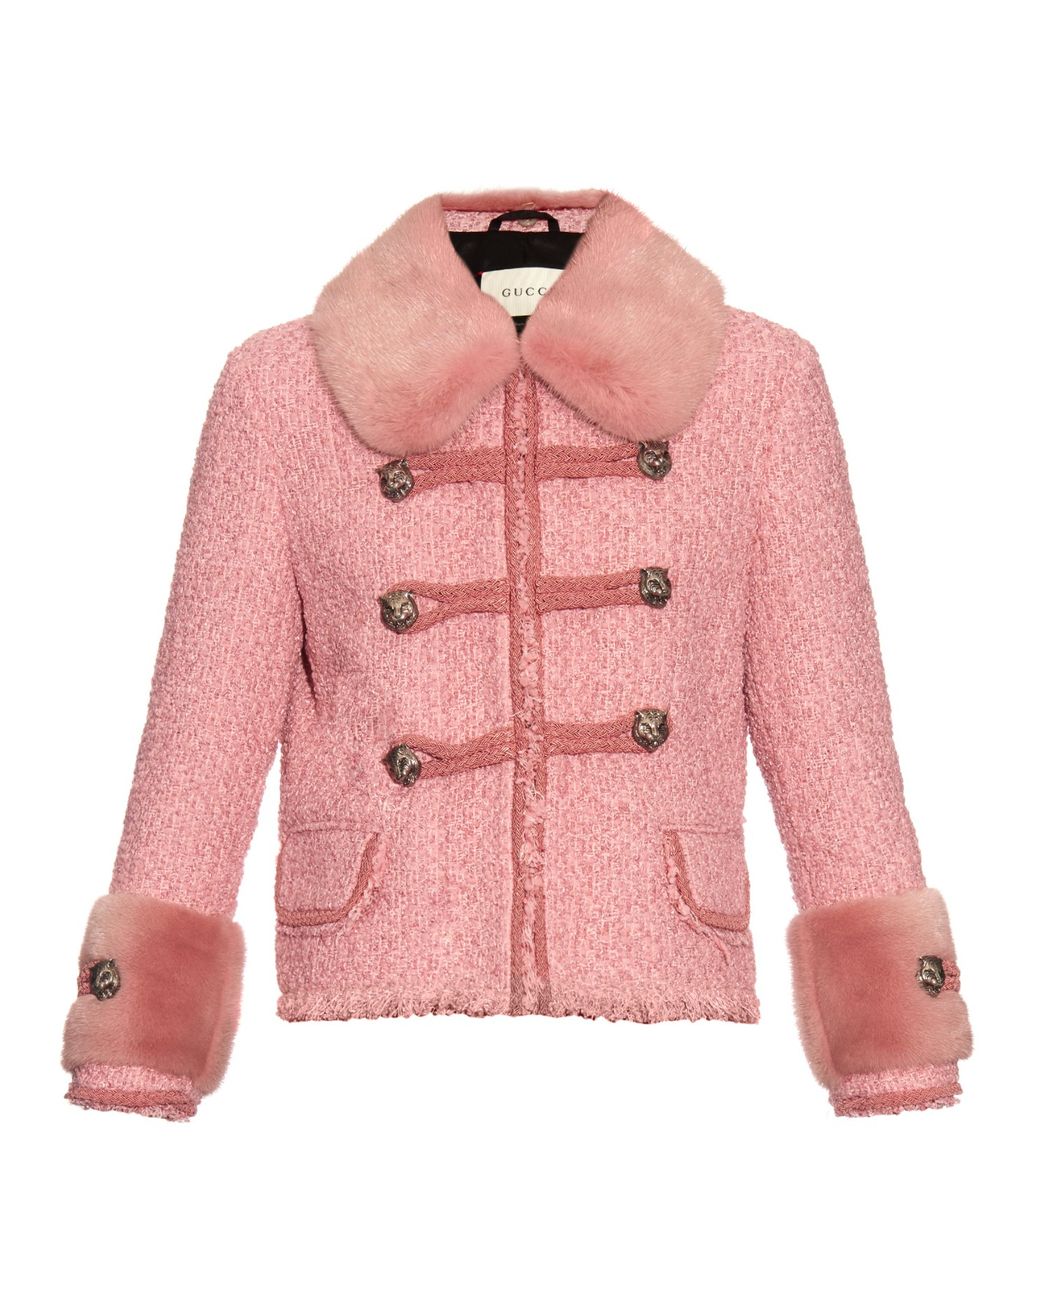 Gucci Mink-Fur and Tweed Jacket in Pink | Lyst